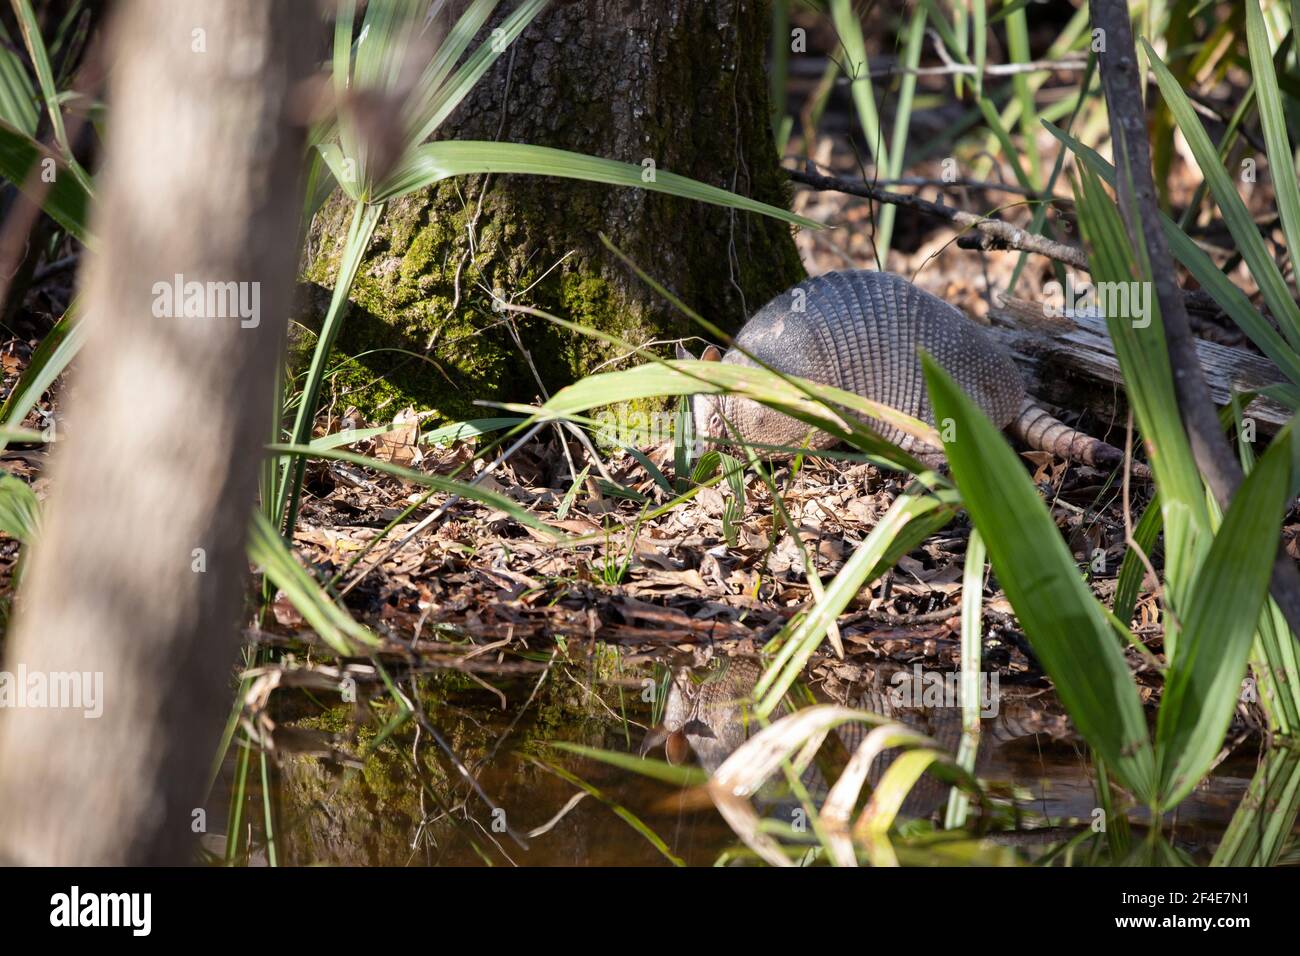 Nine-banded armadillo (Dasypus novemcinctus) and its reflection foraging for insects near a stream Stock Photo